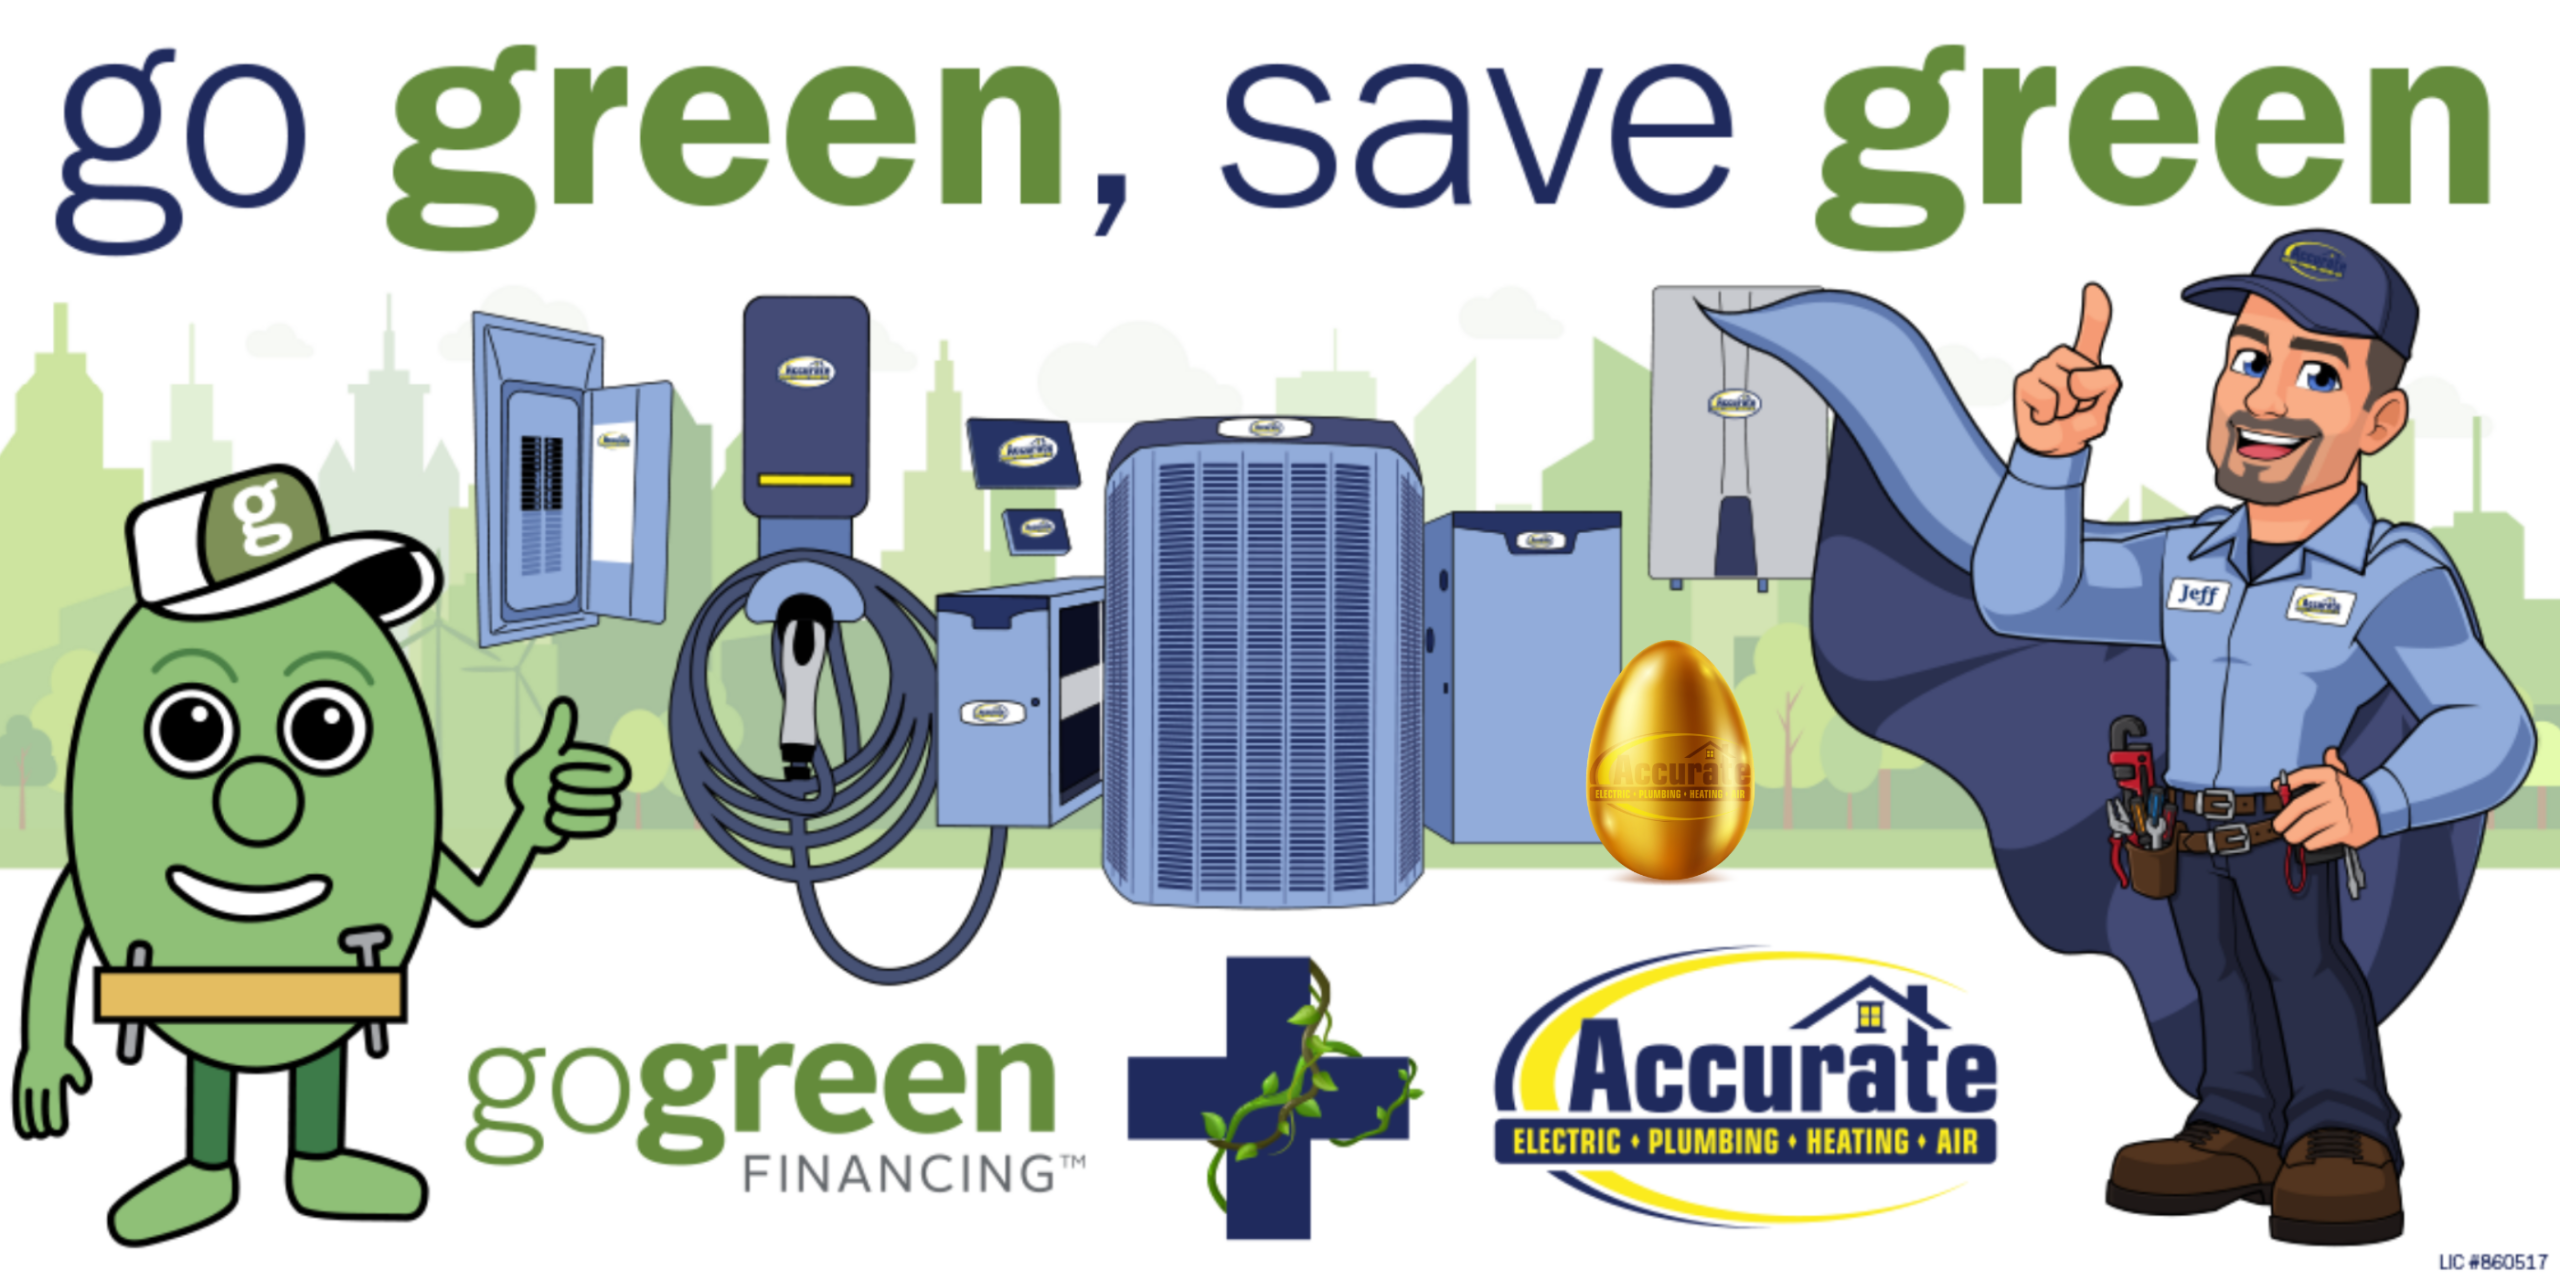 Easter Egg Graphic For Go Green Financing